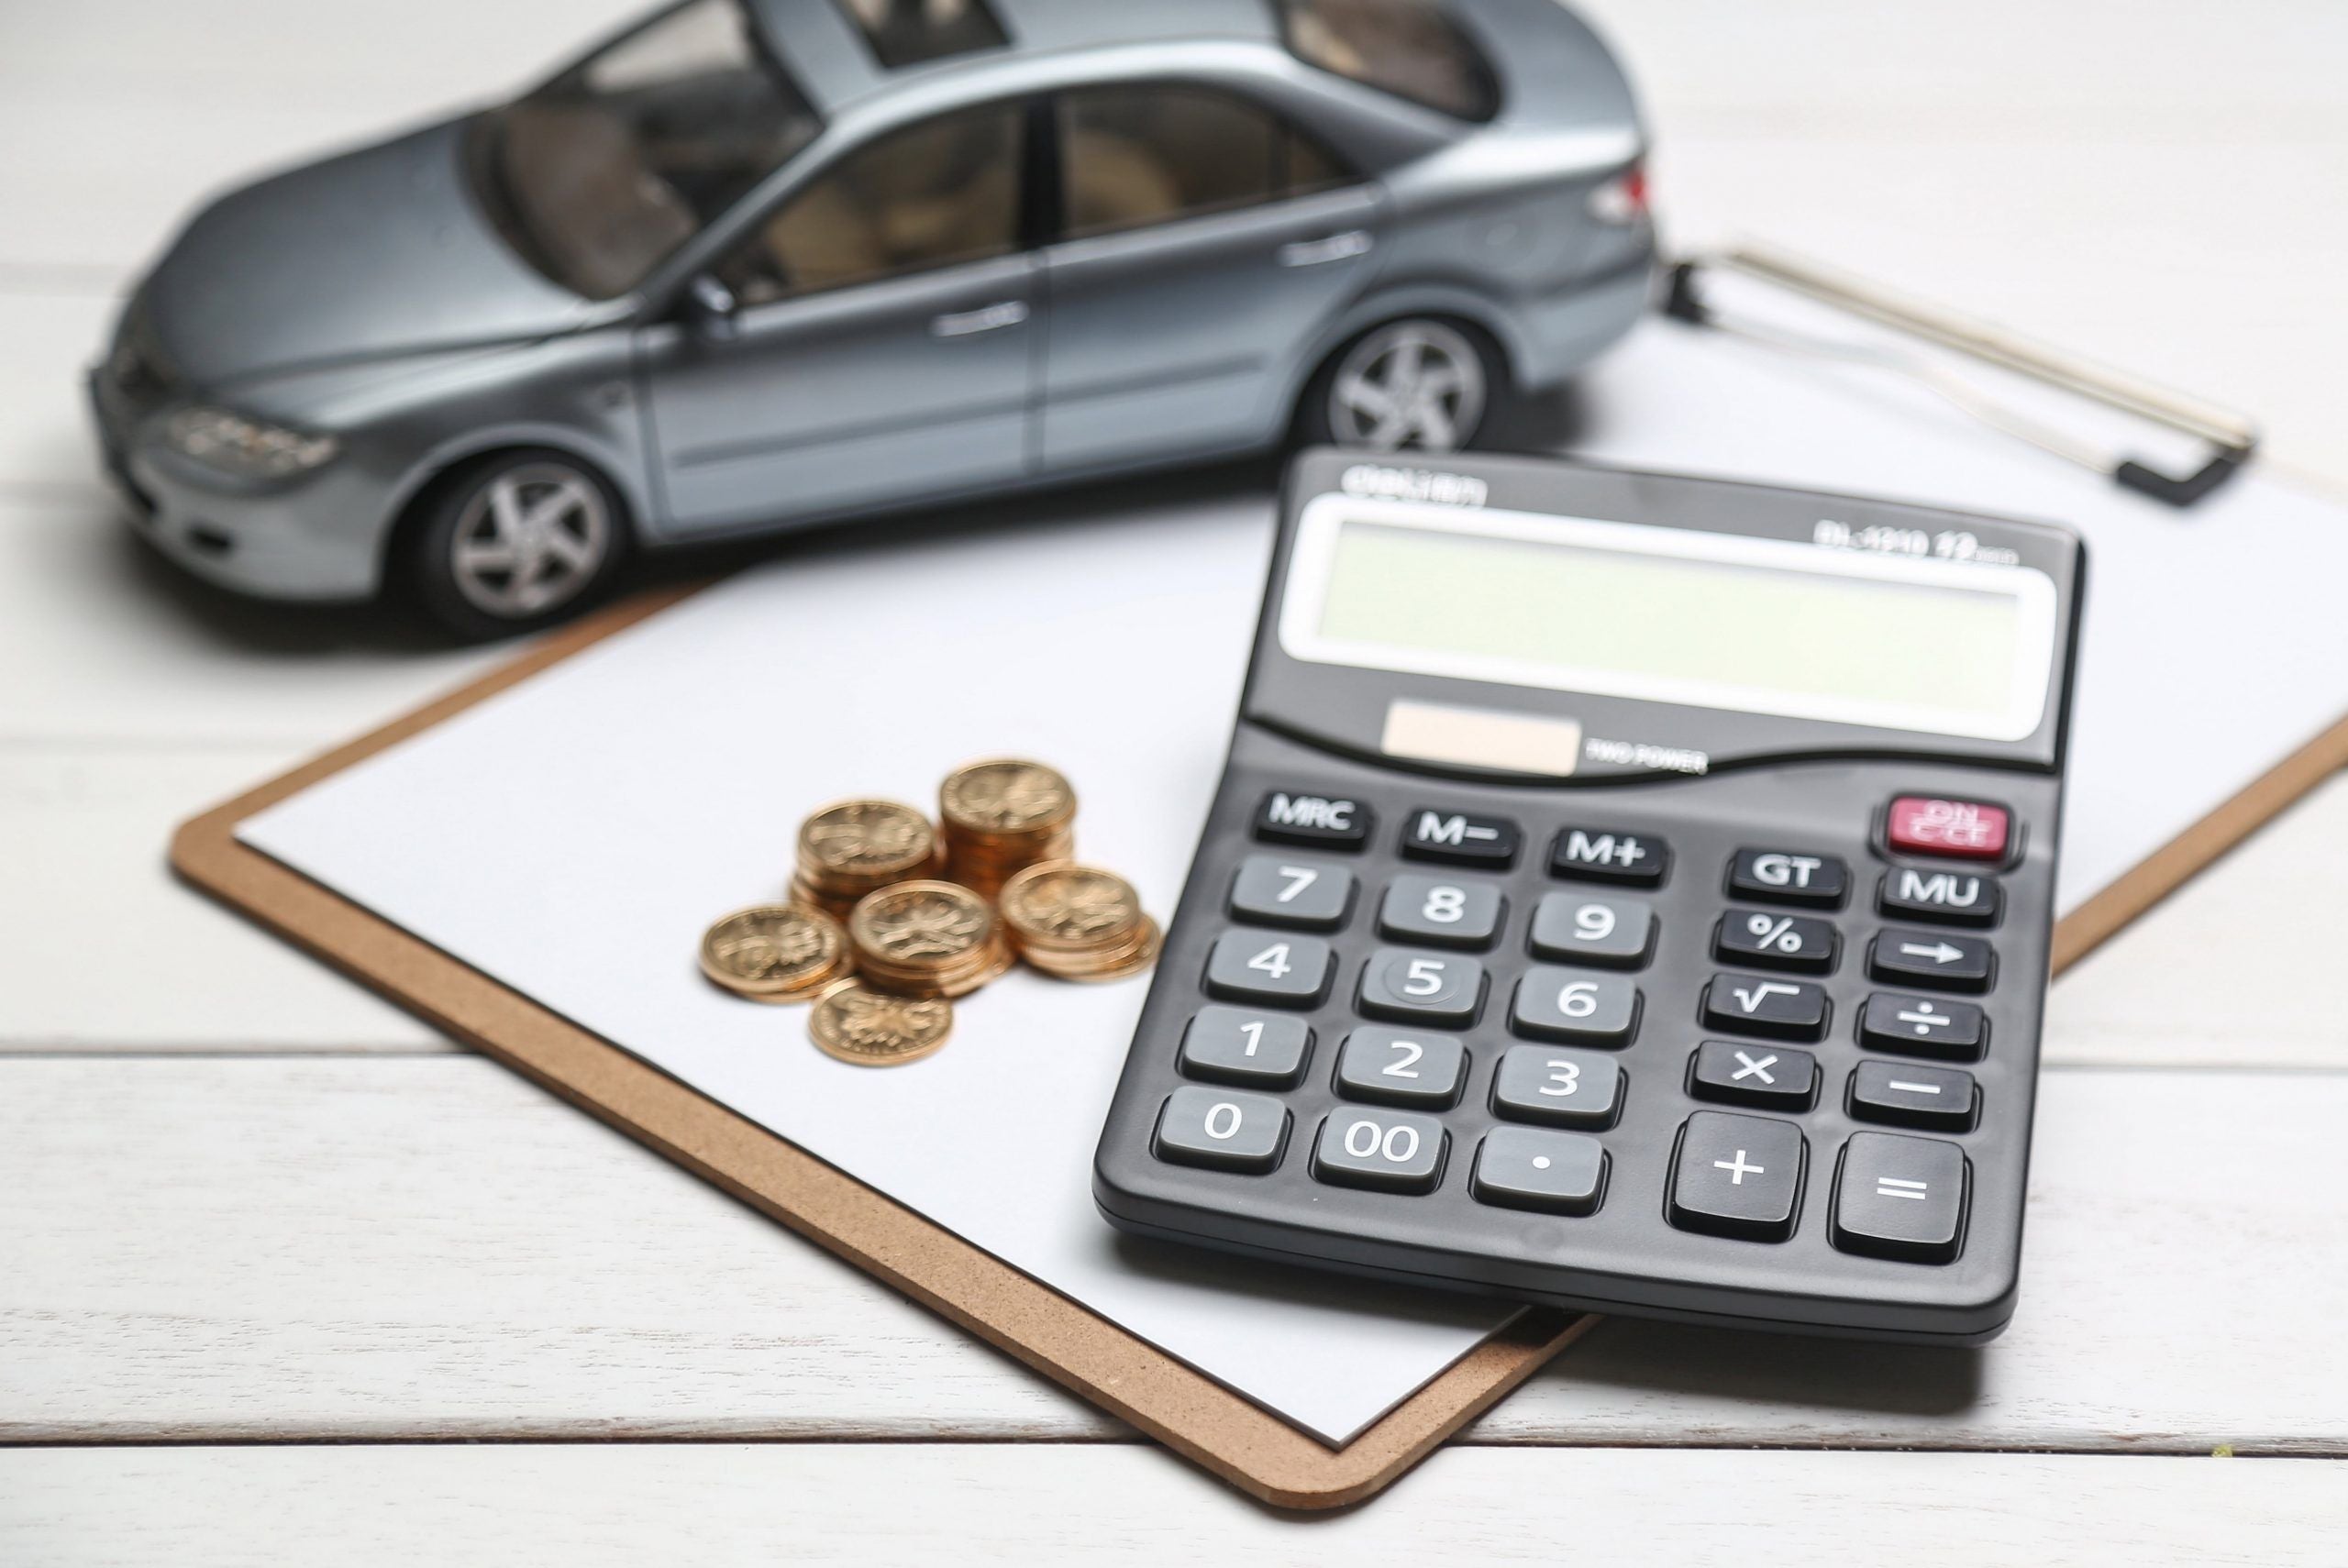 How much Tax applies on used cars?